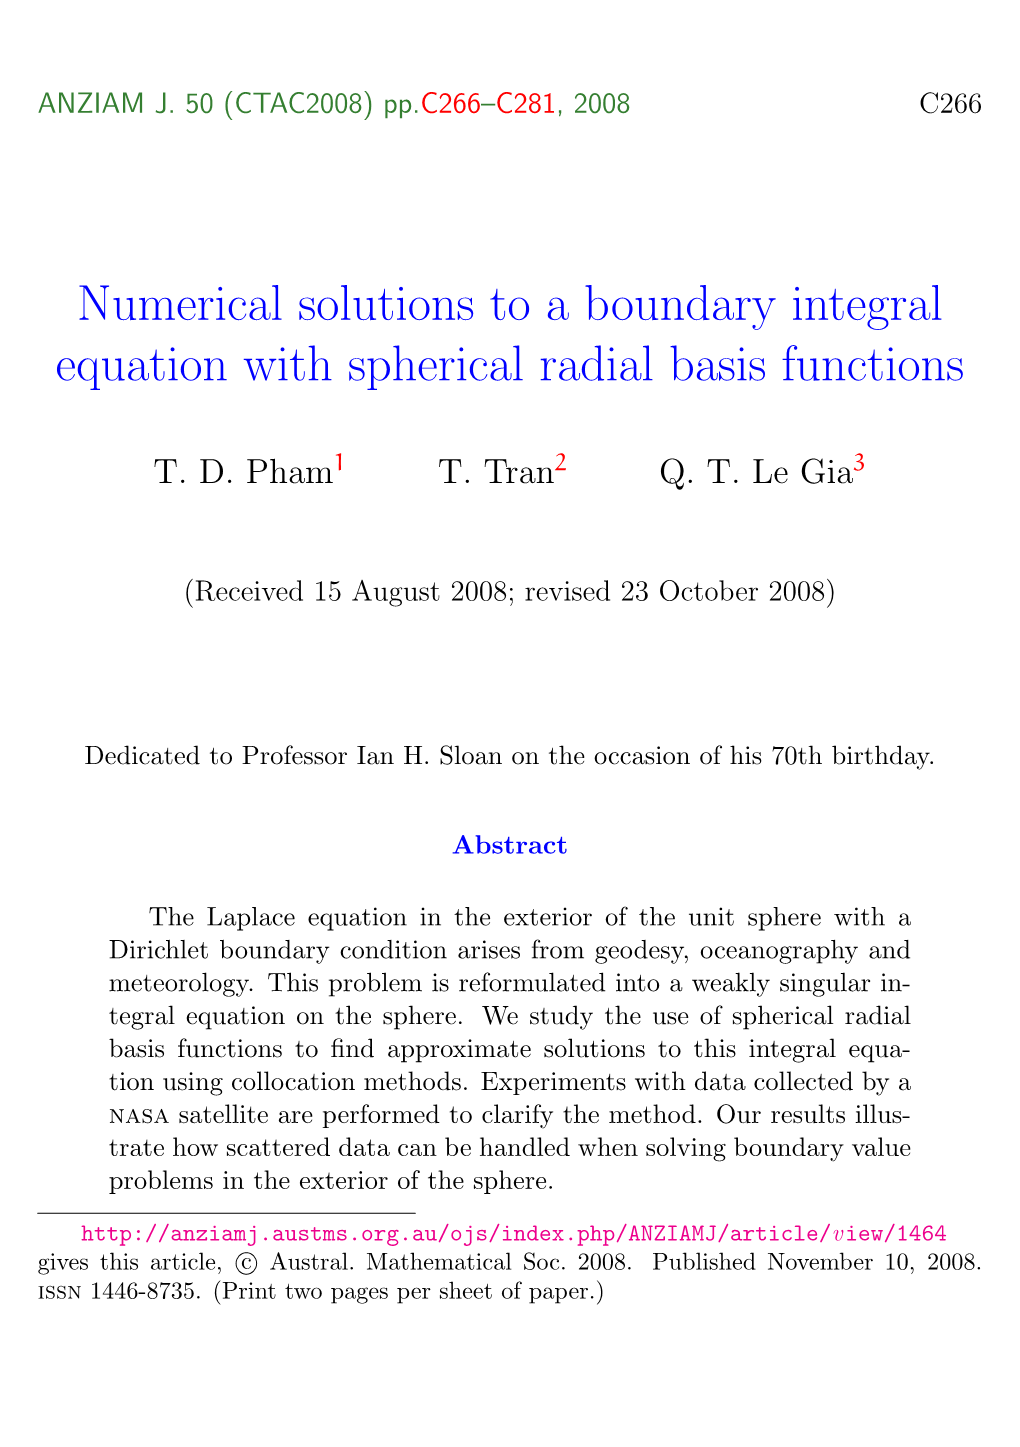 Numerical Solutions to a Boundary Integral Equation with Spherical Radial Basis Functions